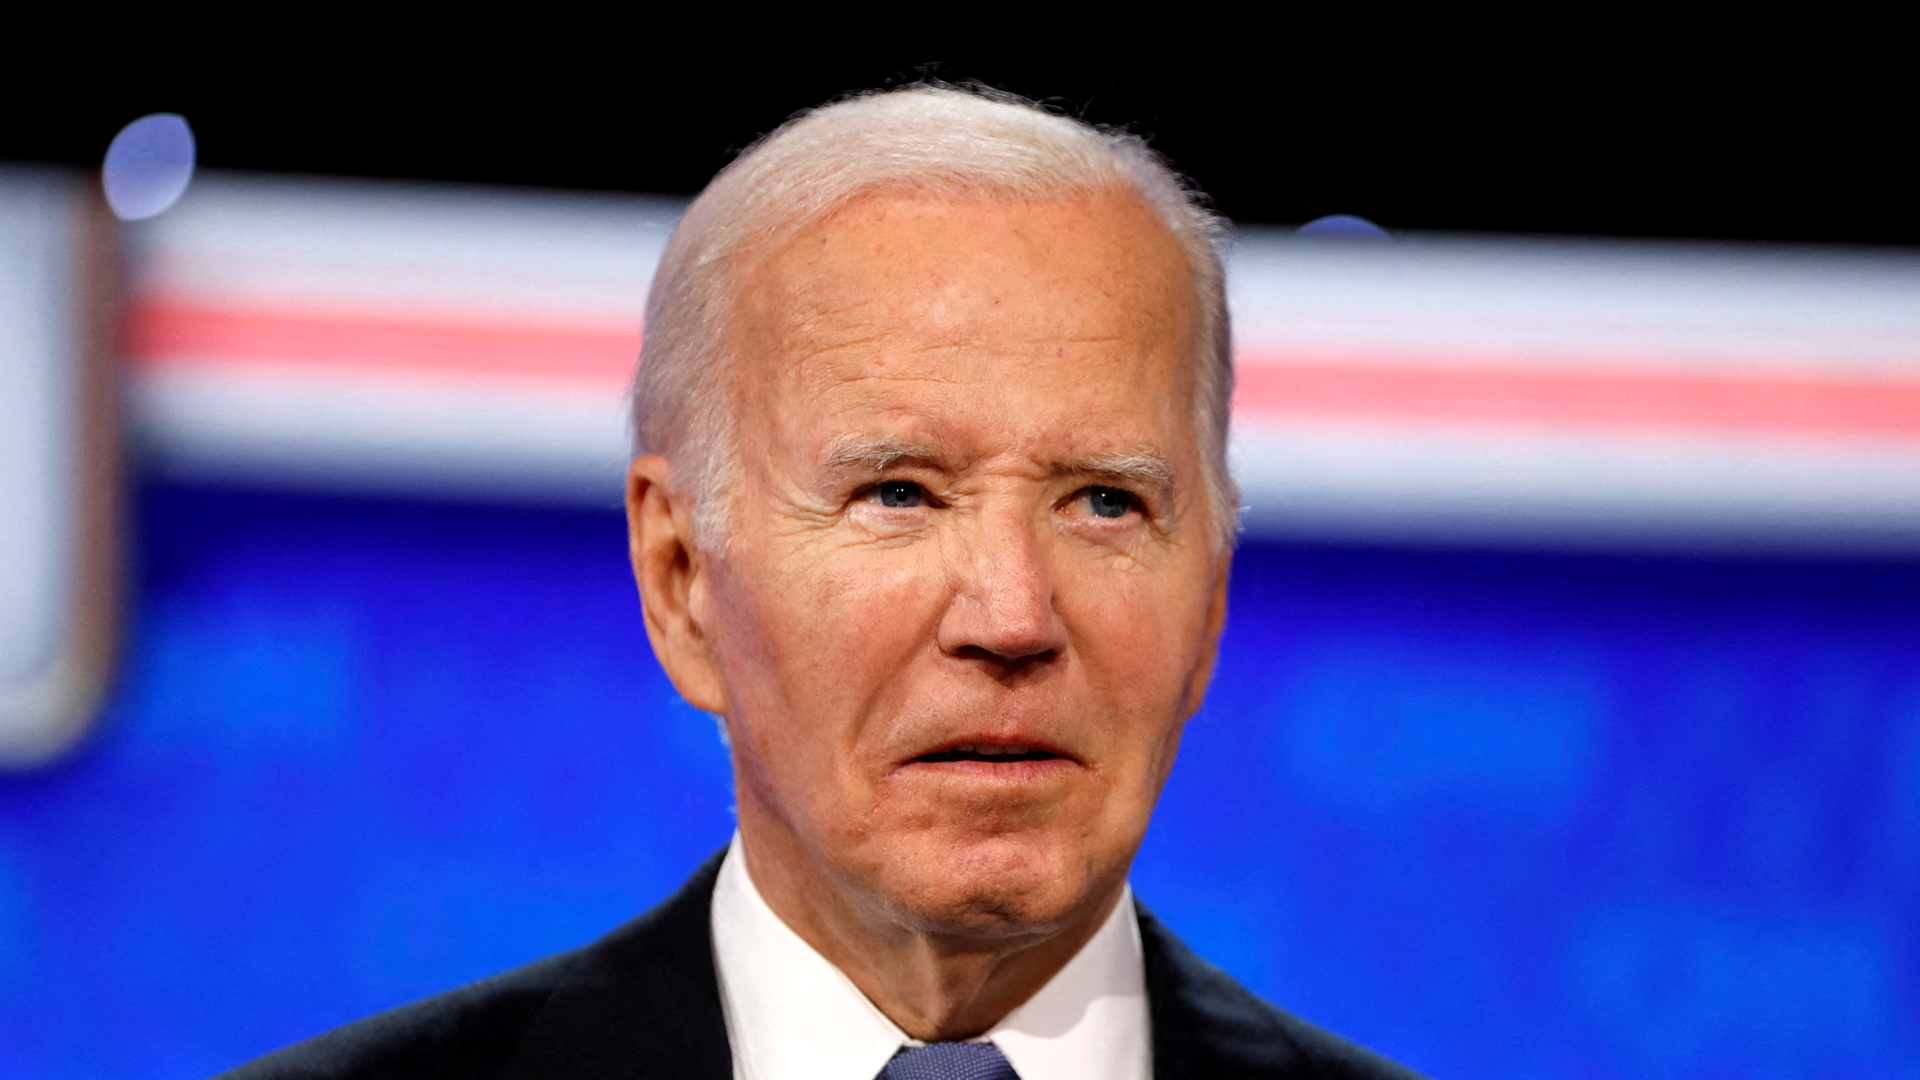 Joe Biden ‘did the right thing’ for America in stepping aside – clear sign proved he was a liability, expert says [Video]